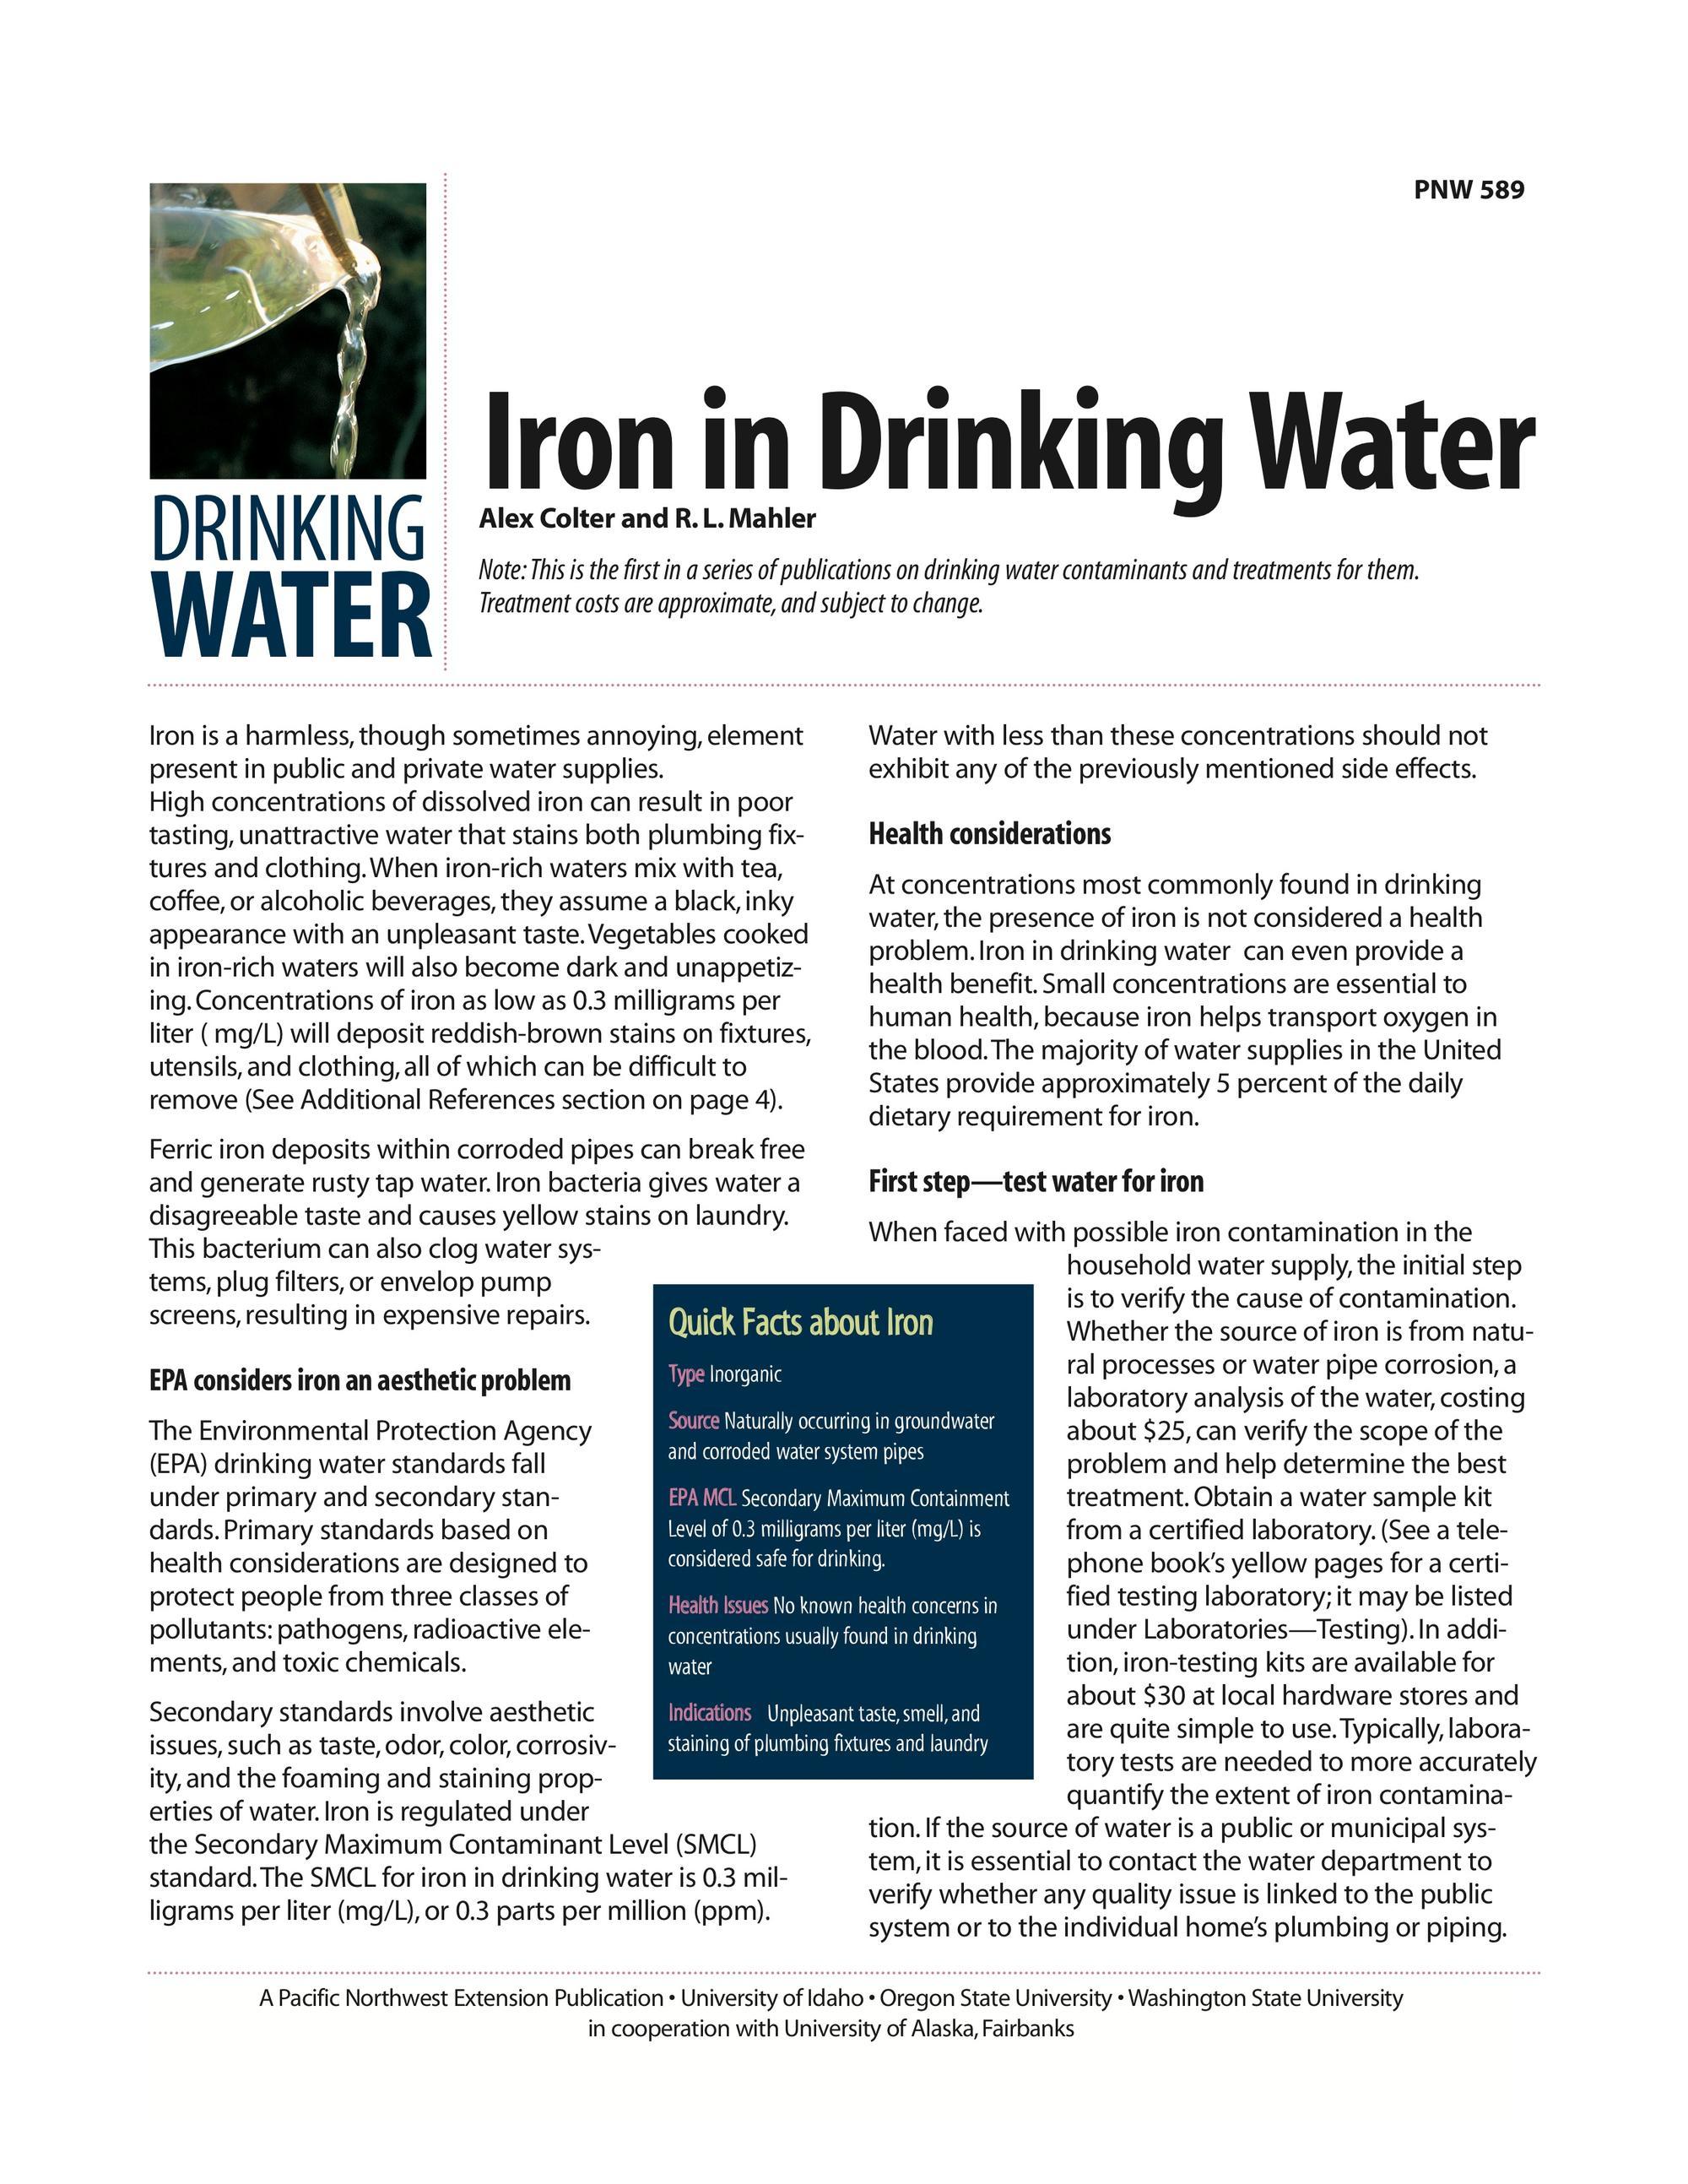 Image of Iron in Drinking Water publication